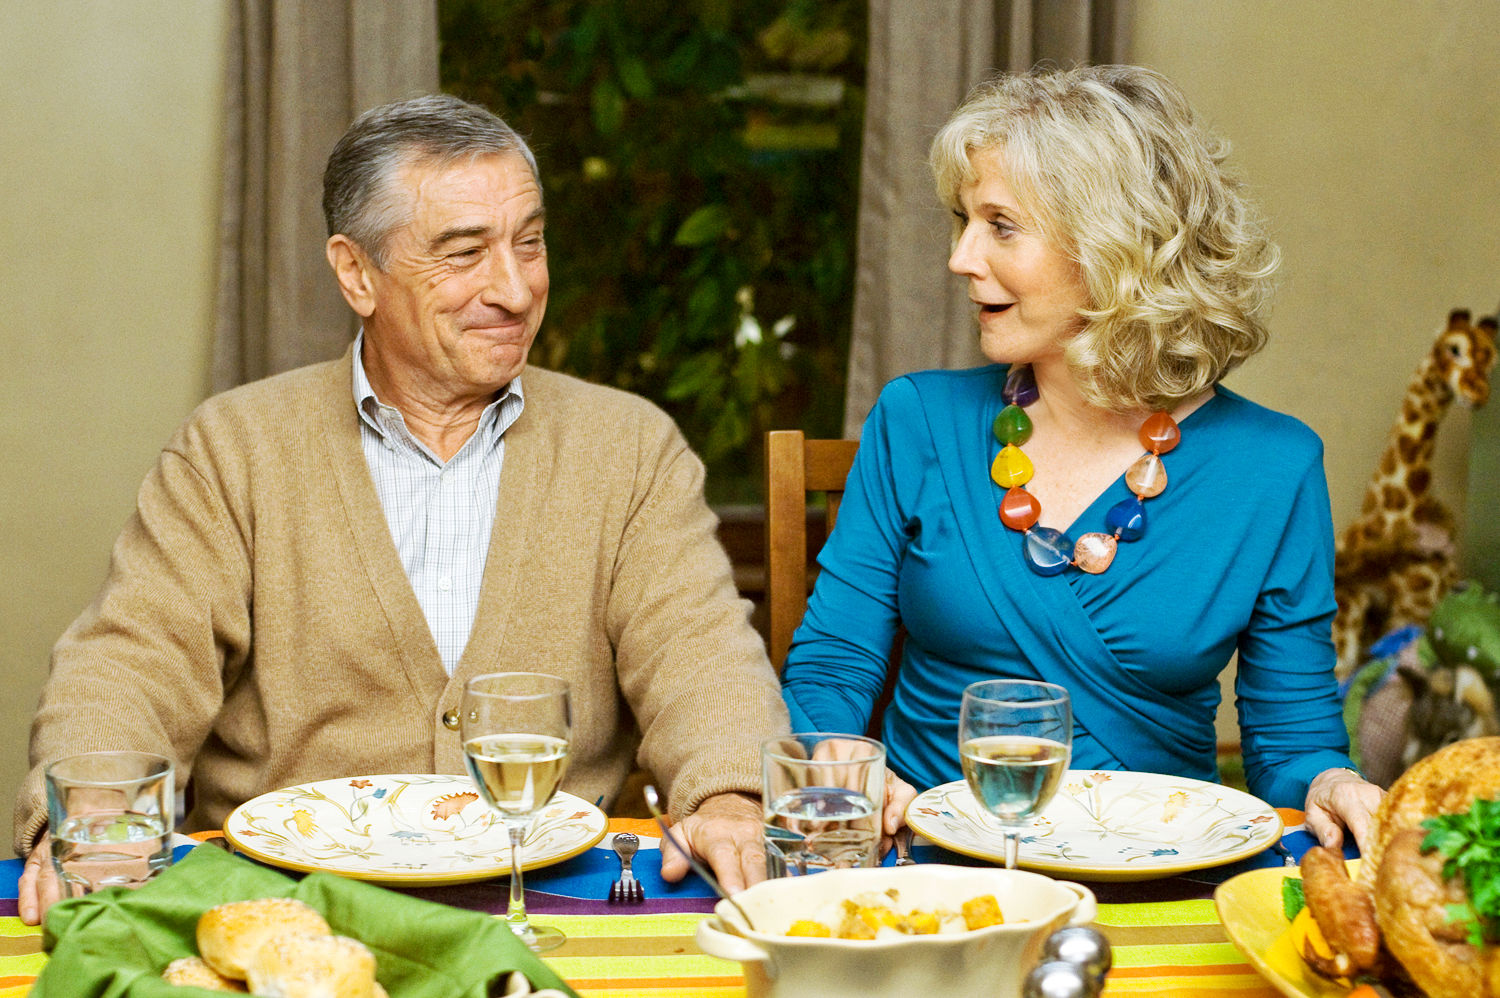 Robert De Niro stars as Jack Byrnes and Blythe Danner stars as Dina Byrnes in Universal Pictures' Little Fockers (2010)